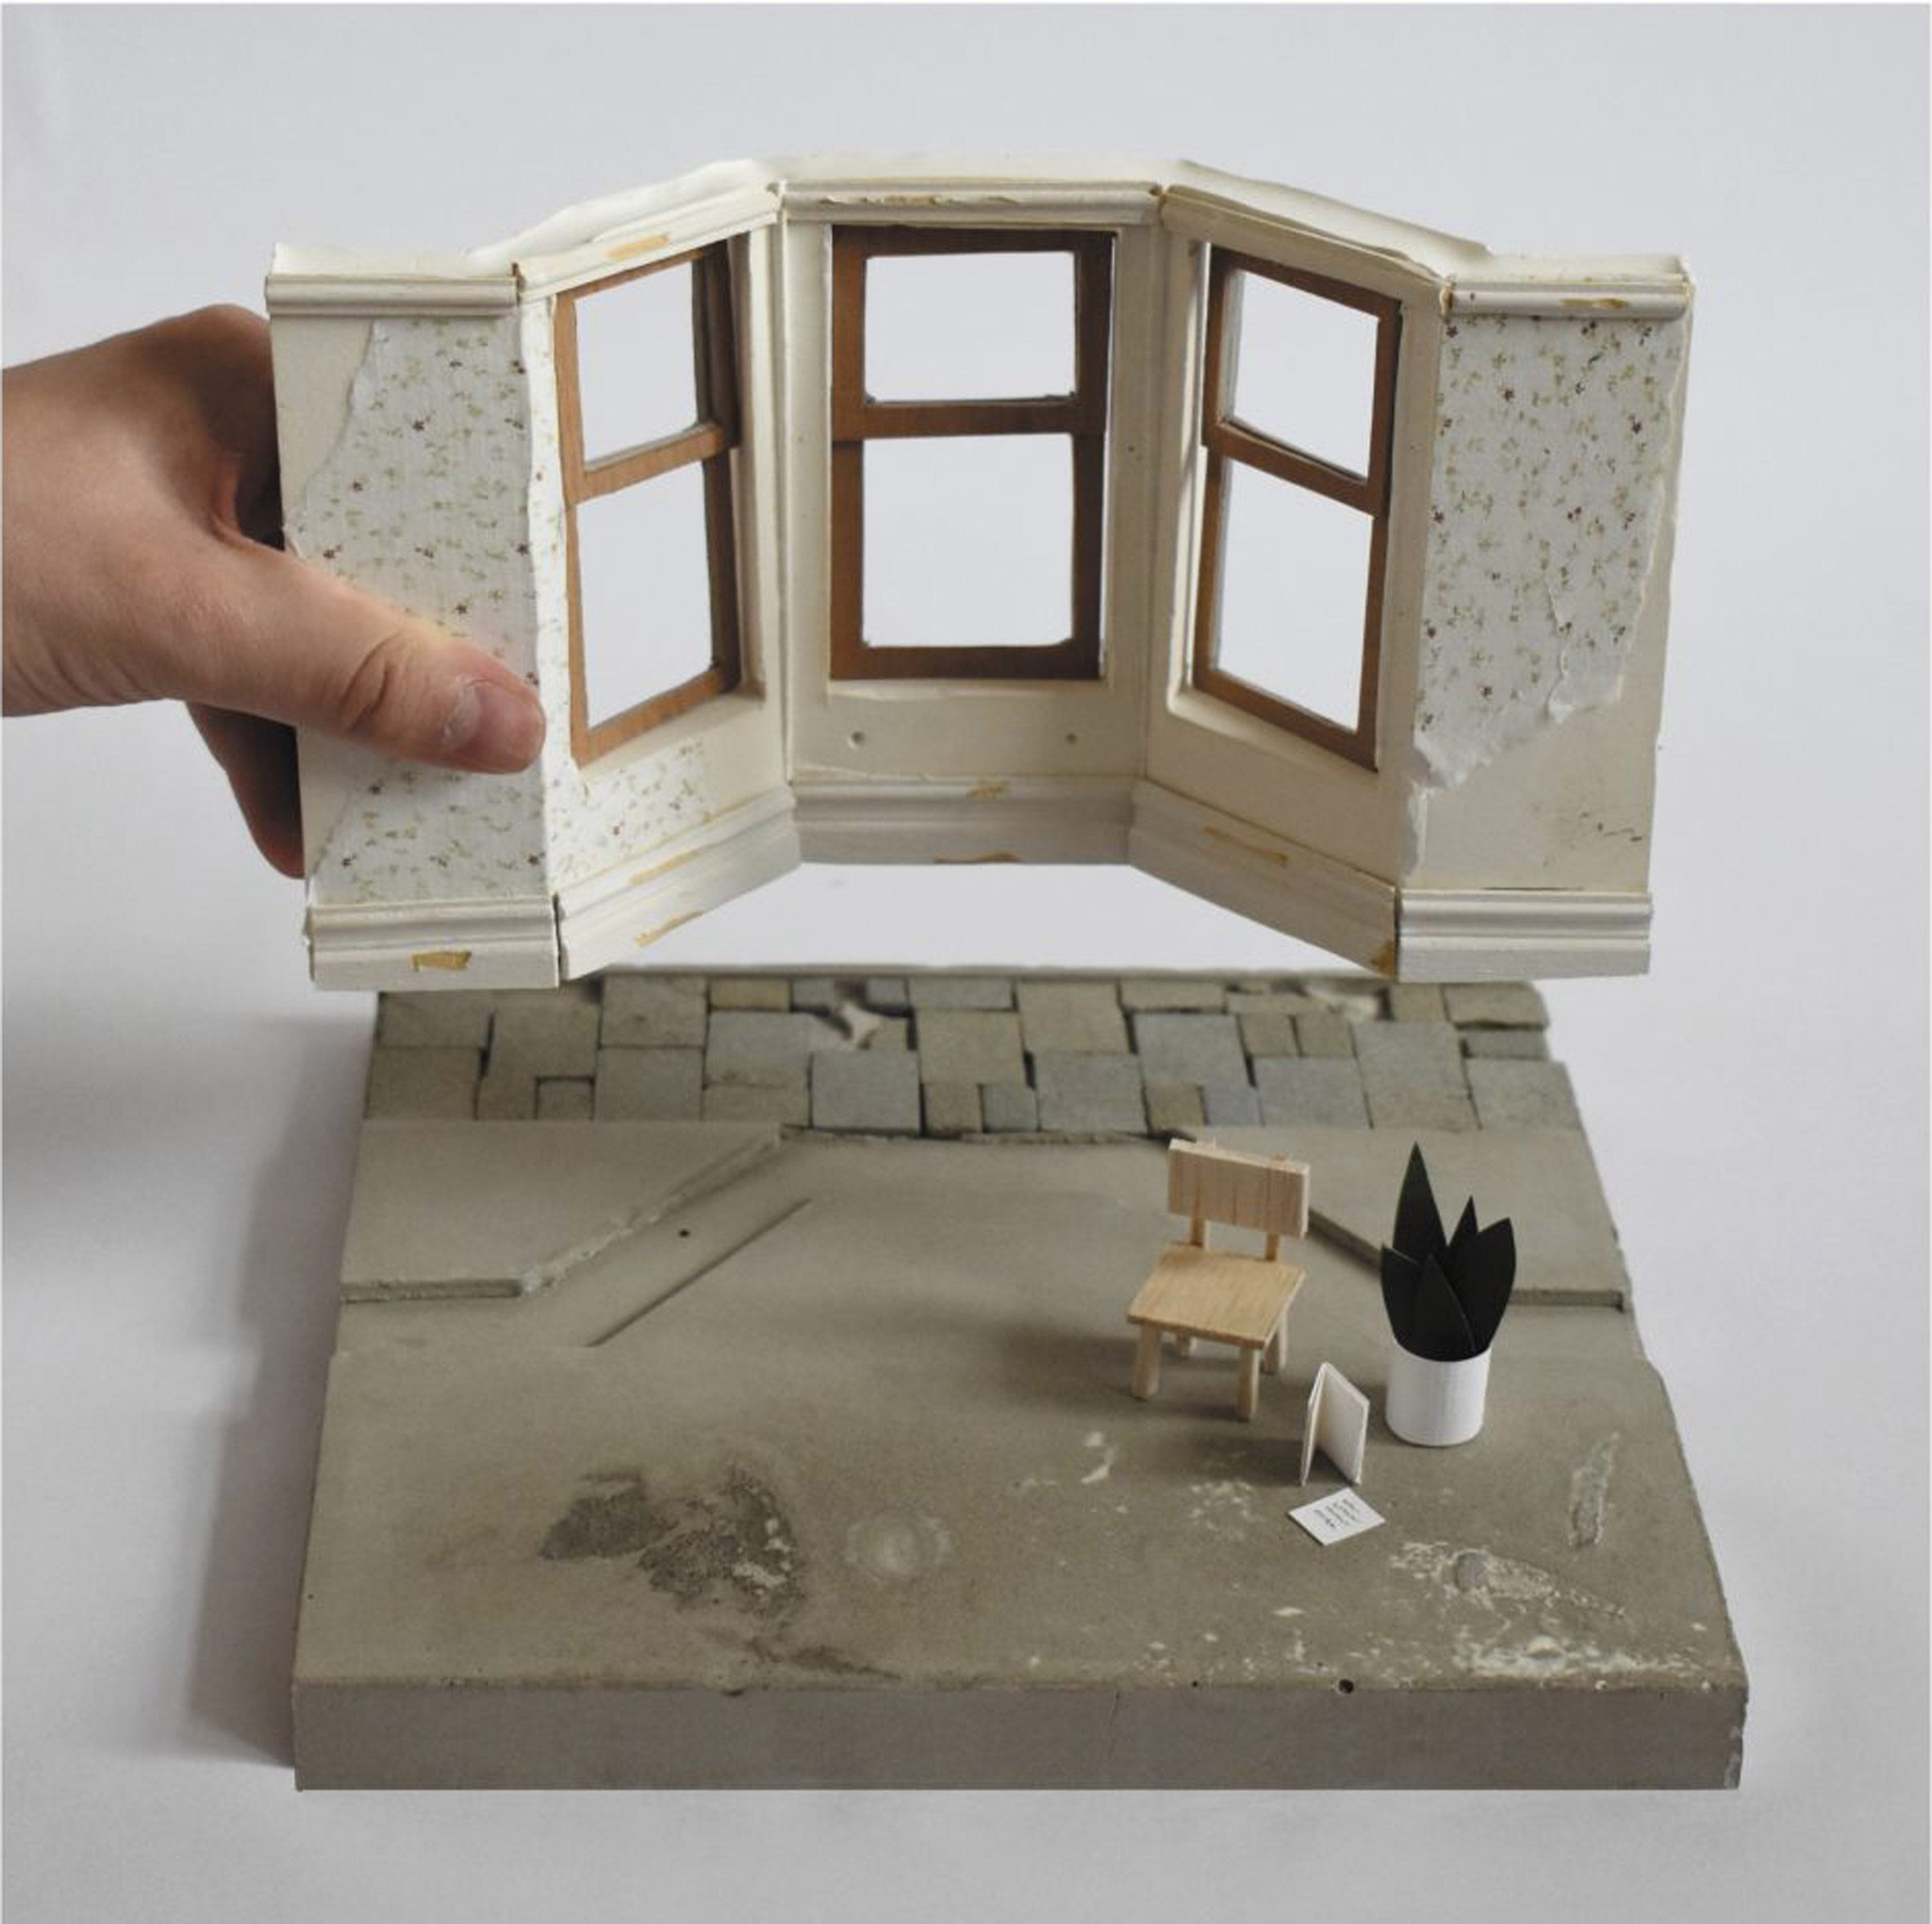 An architectural model exploring craft